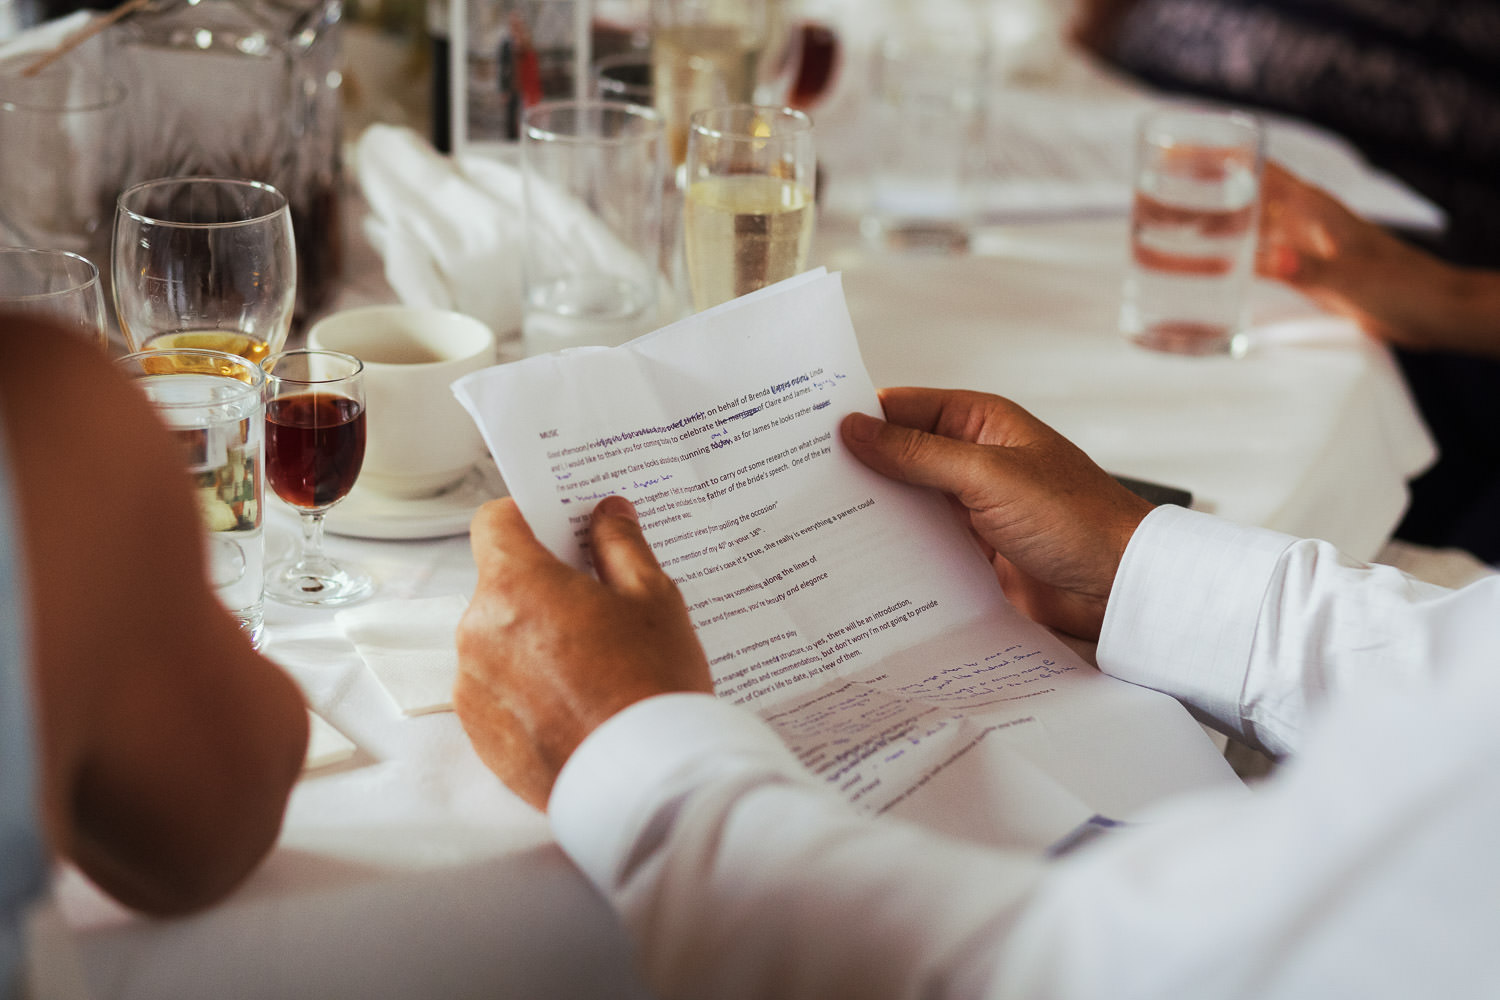 A father's hands holding his speech at a wedding.